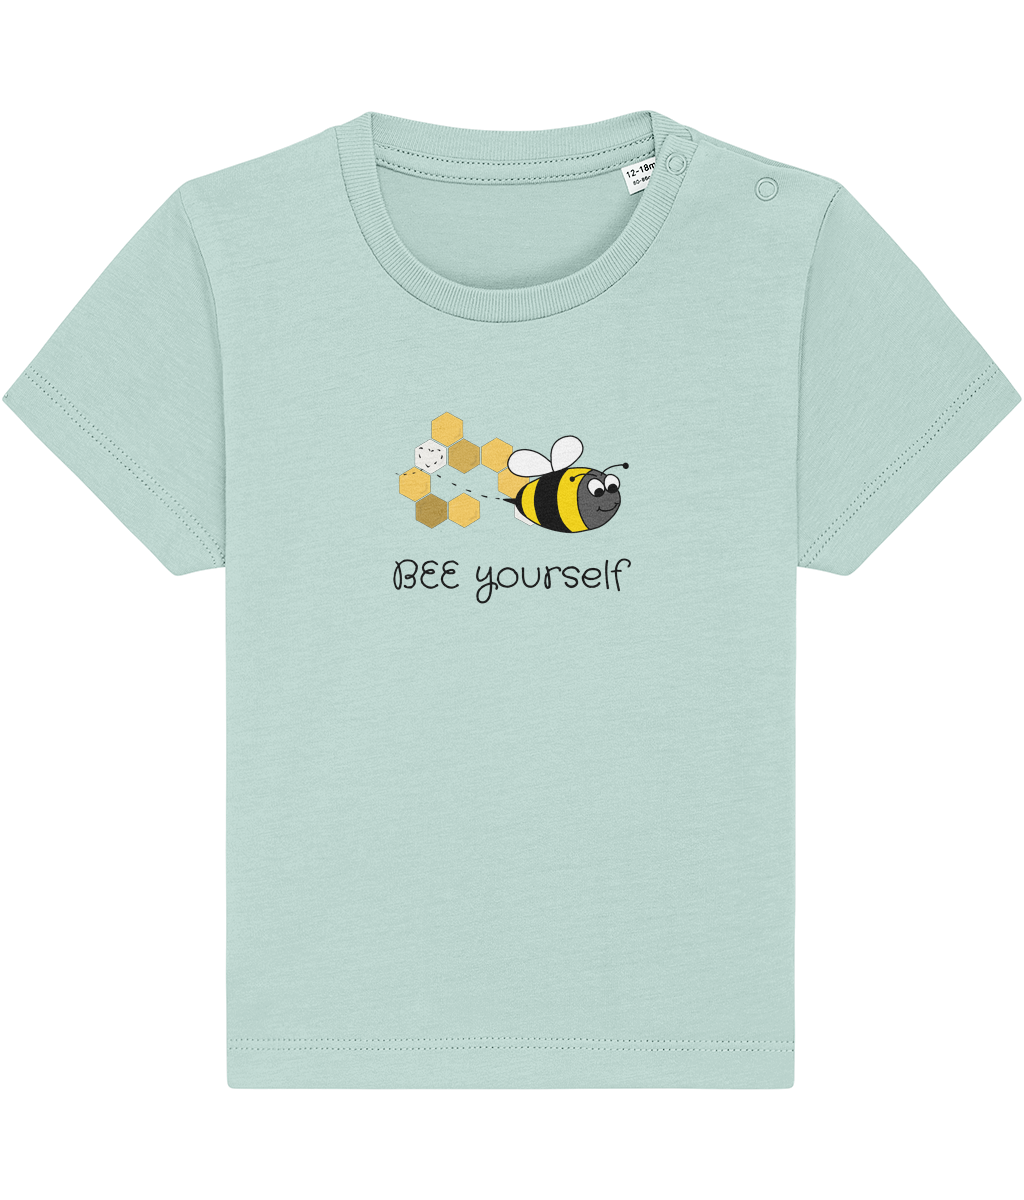 BEE yourself T-shirt